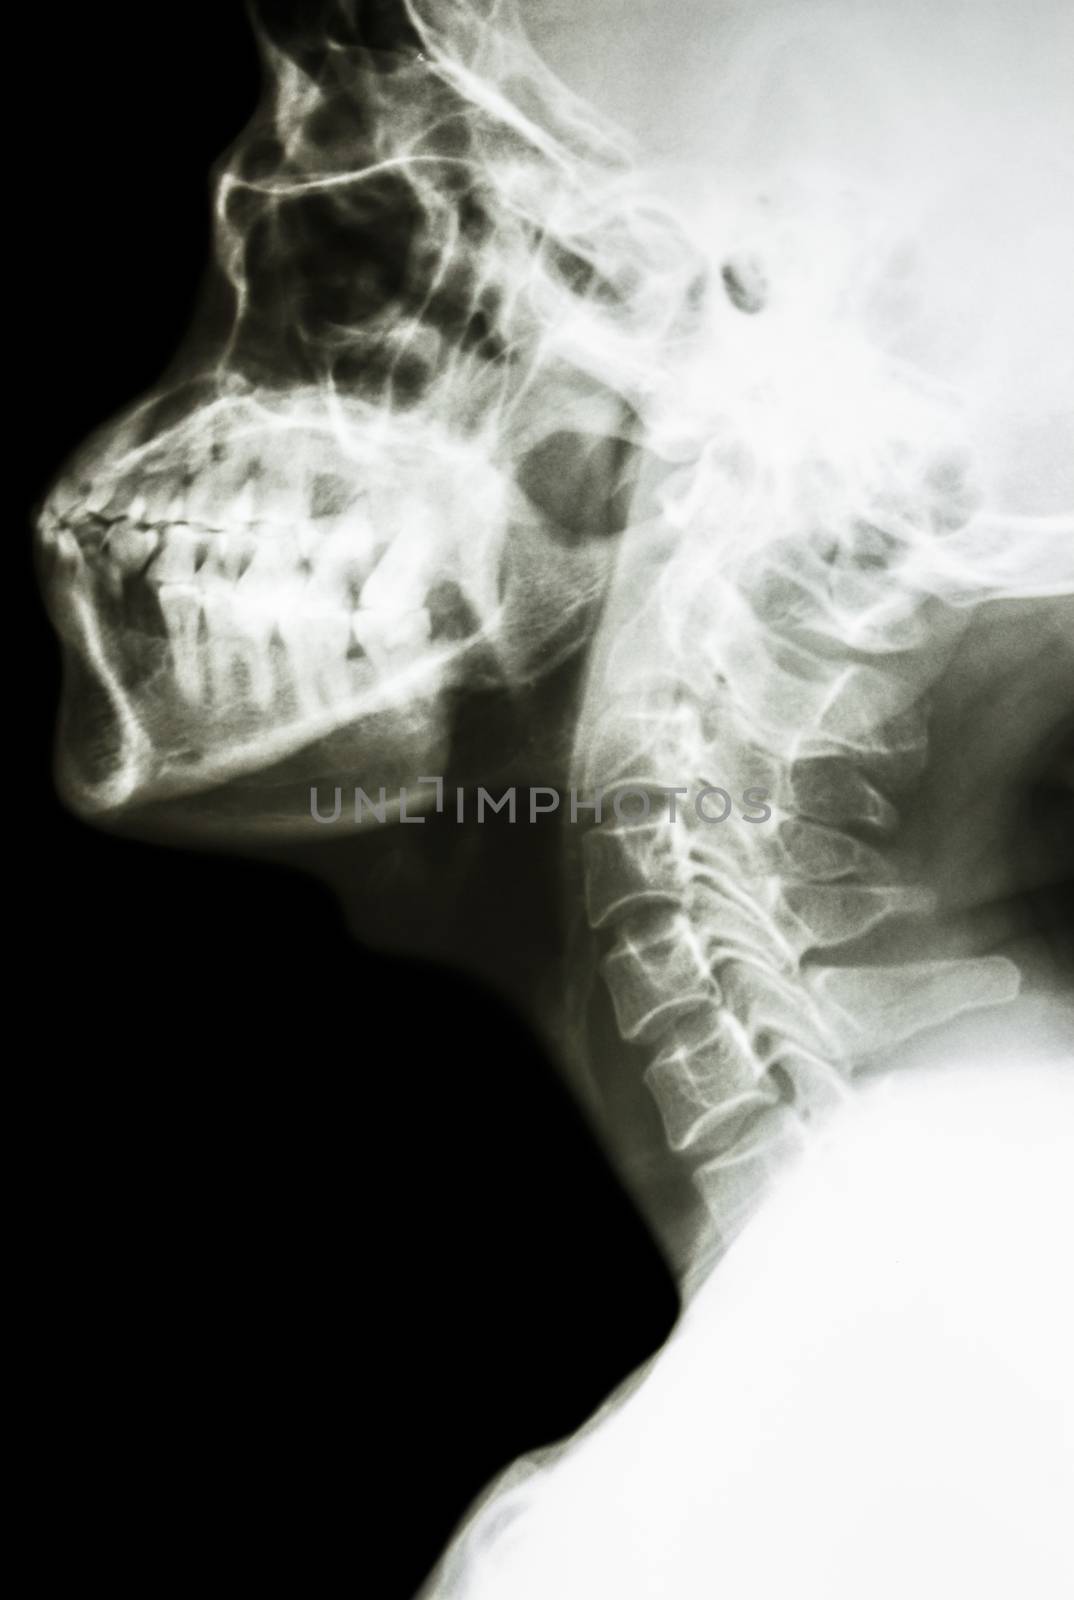 film x-ray cervical spine lateral : show normal thai man's cervical spine